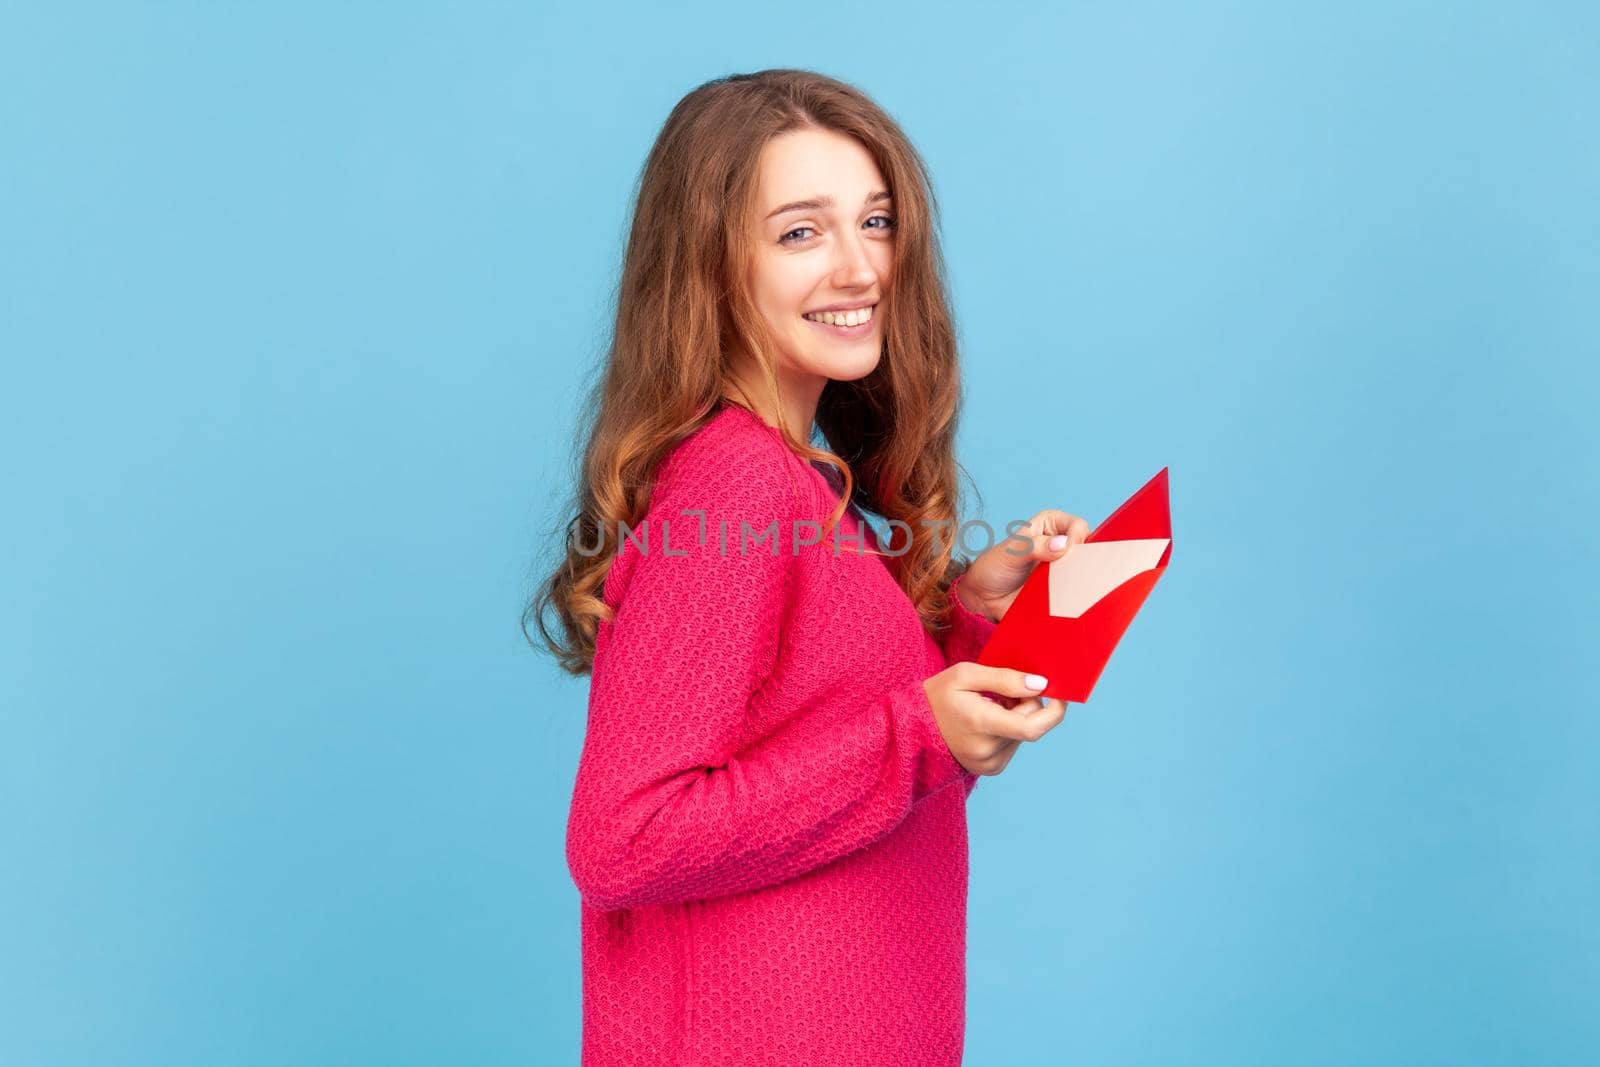 Side view portrait of woman wearing pink pullover, showing romantic letter in red envelope, holding love message and looking at camera with toothy smile. Indoor studio shot isolated on blue background